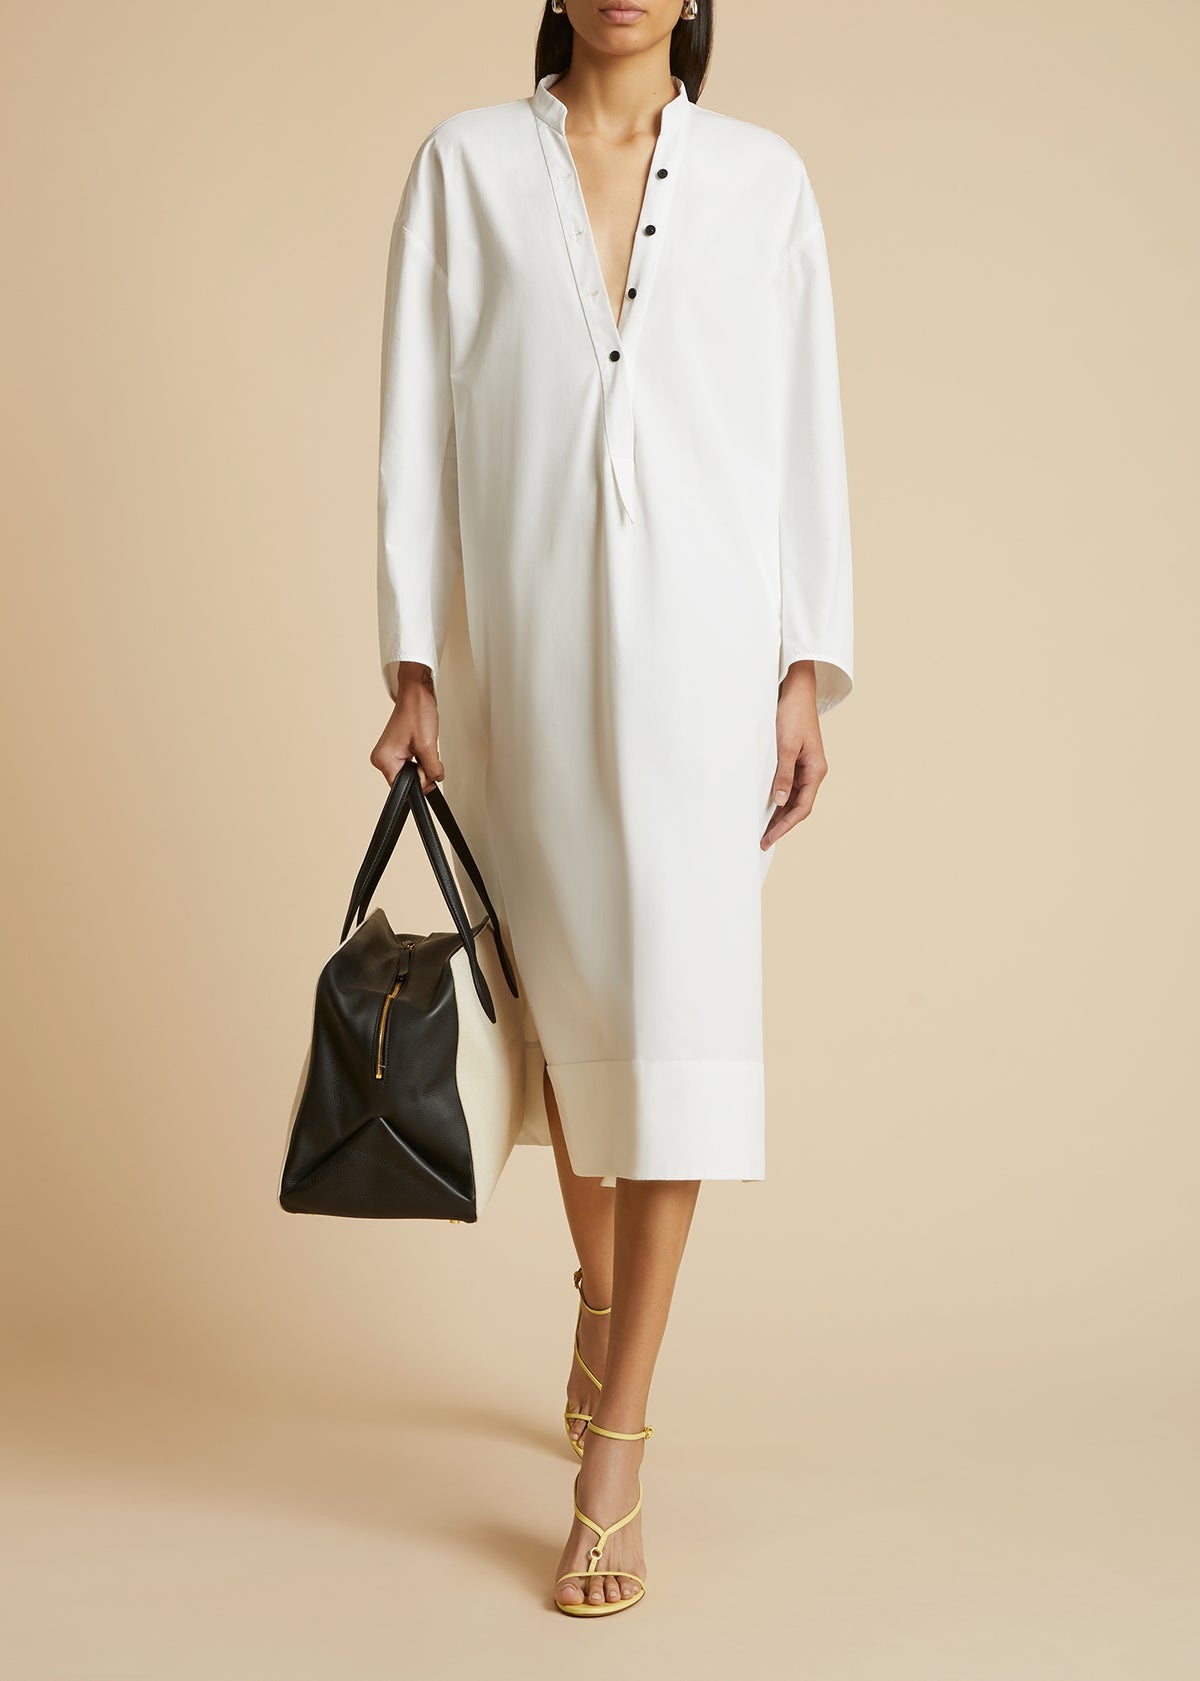 The Brom Dress in White - 1